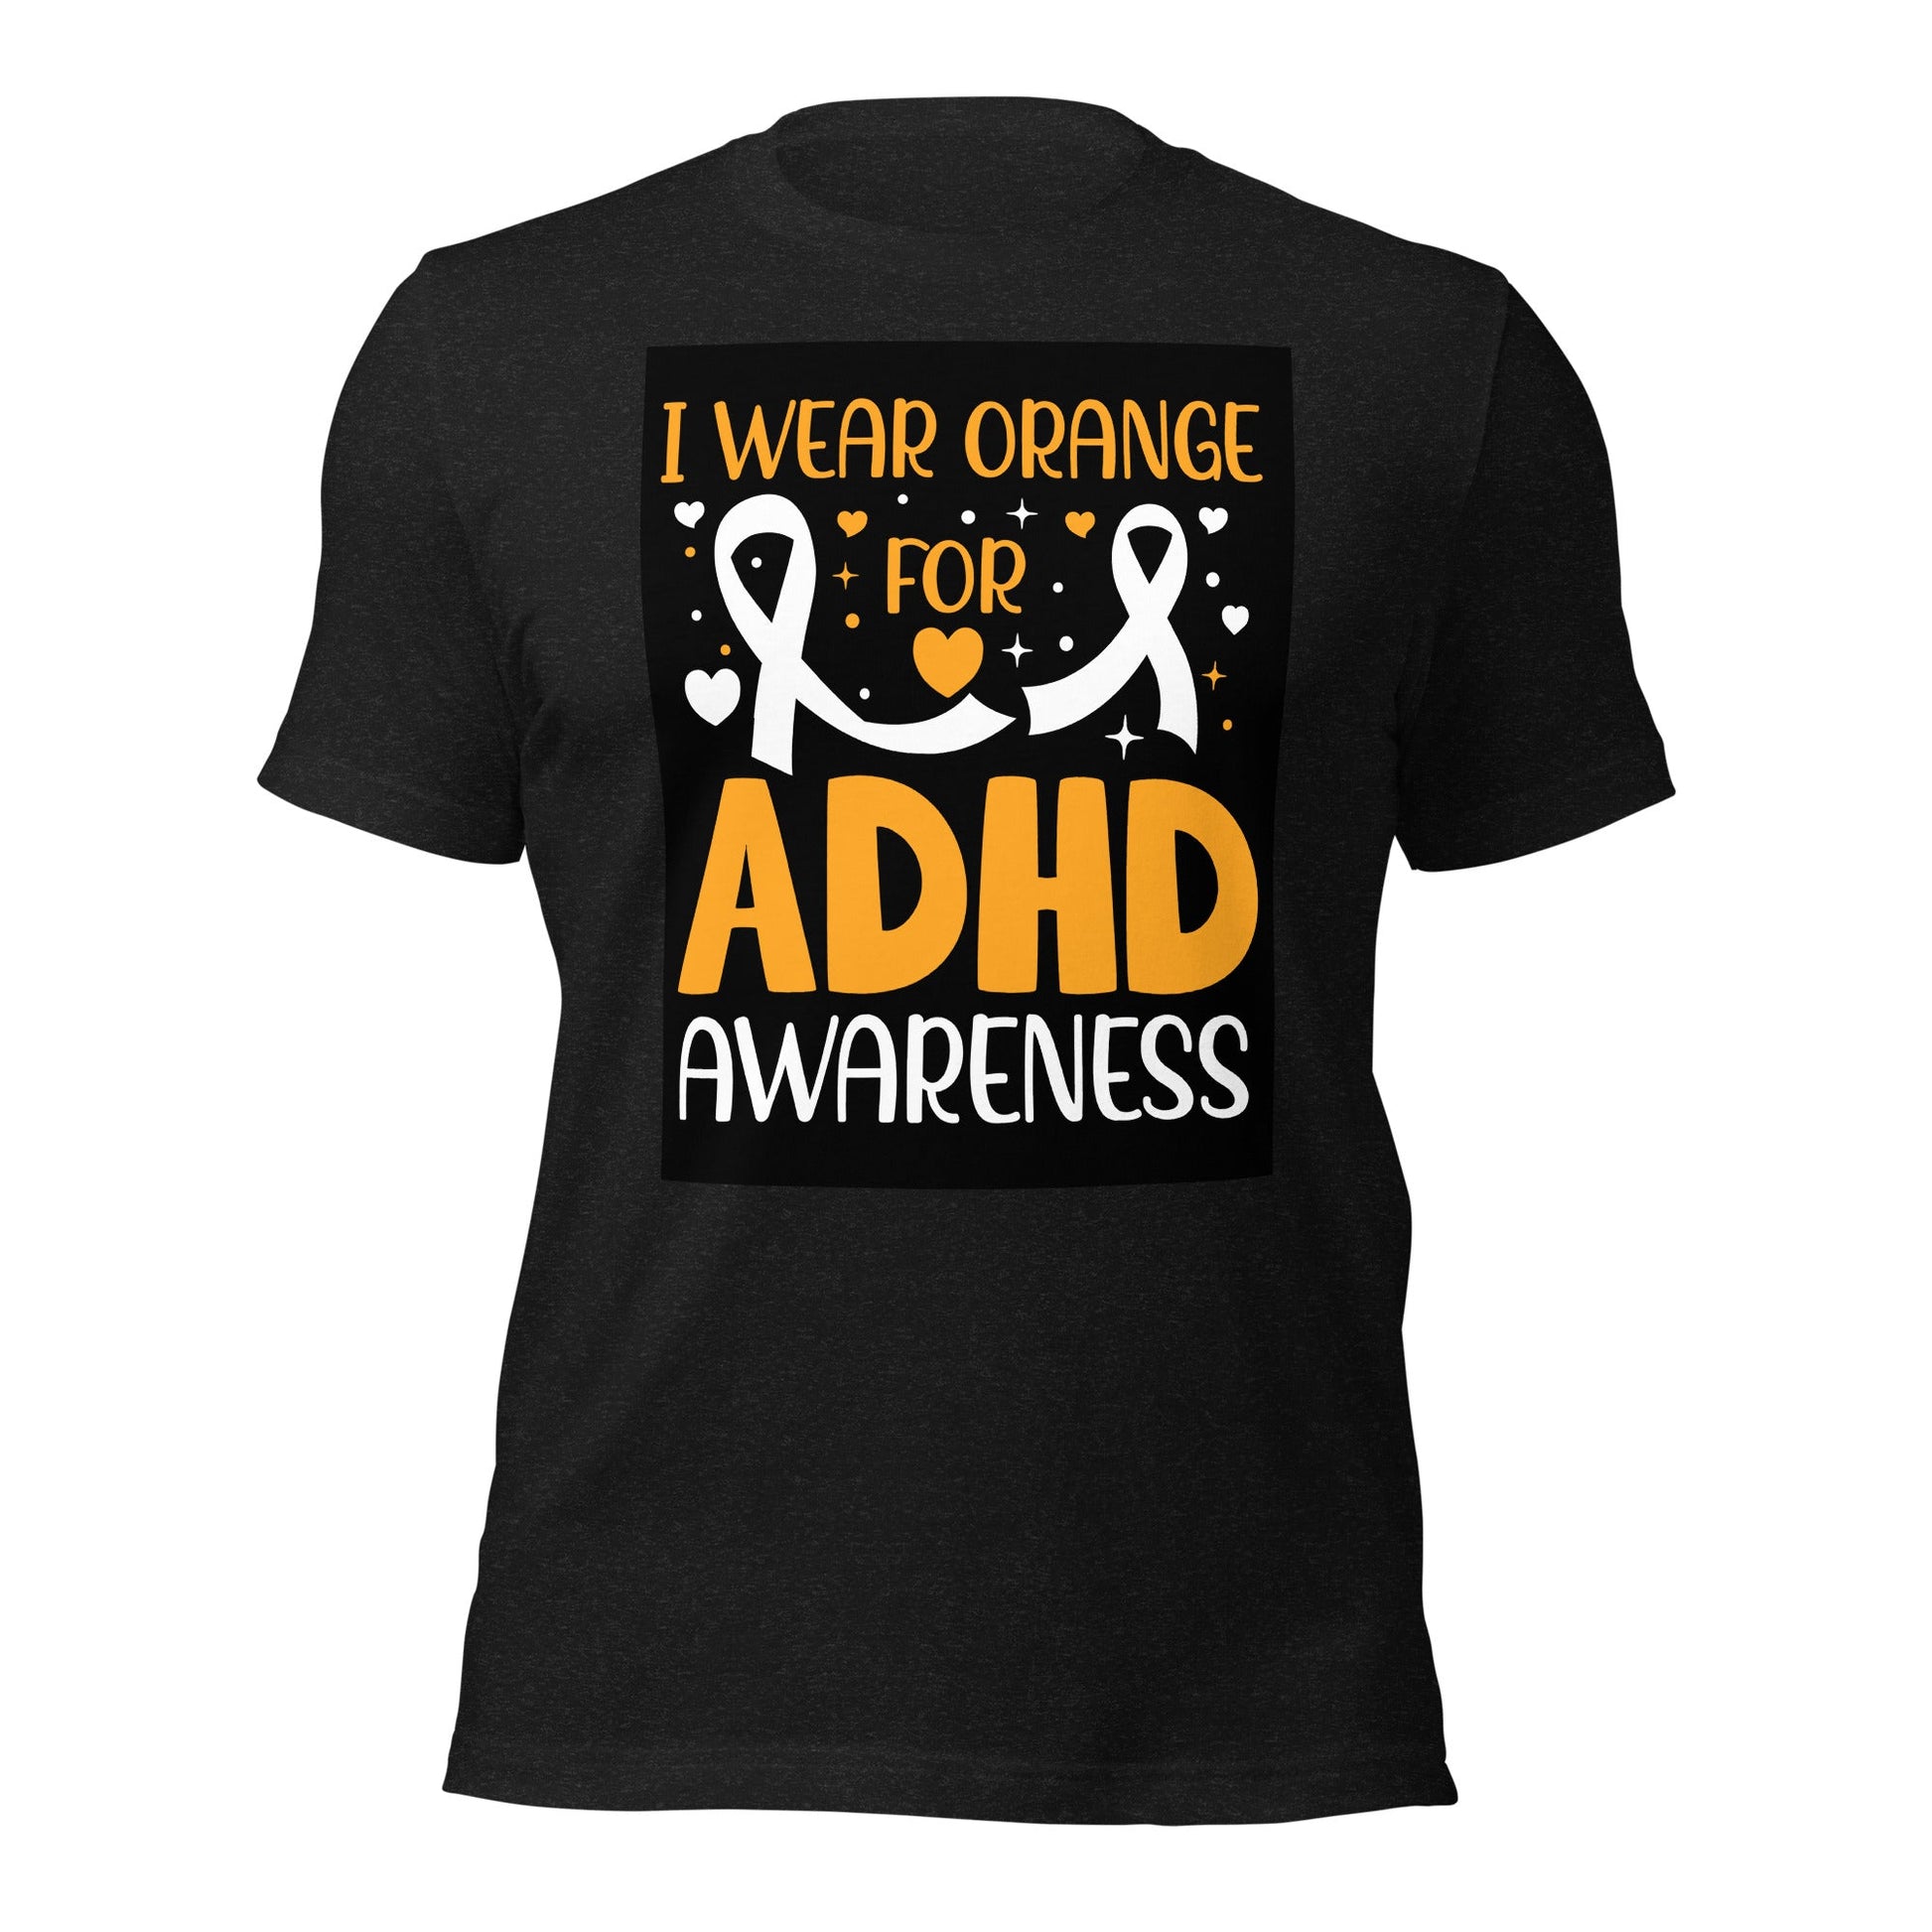 ADHD Awareness Unisex T-Shirt - Uniquely Included